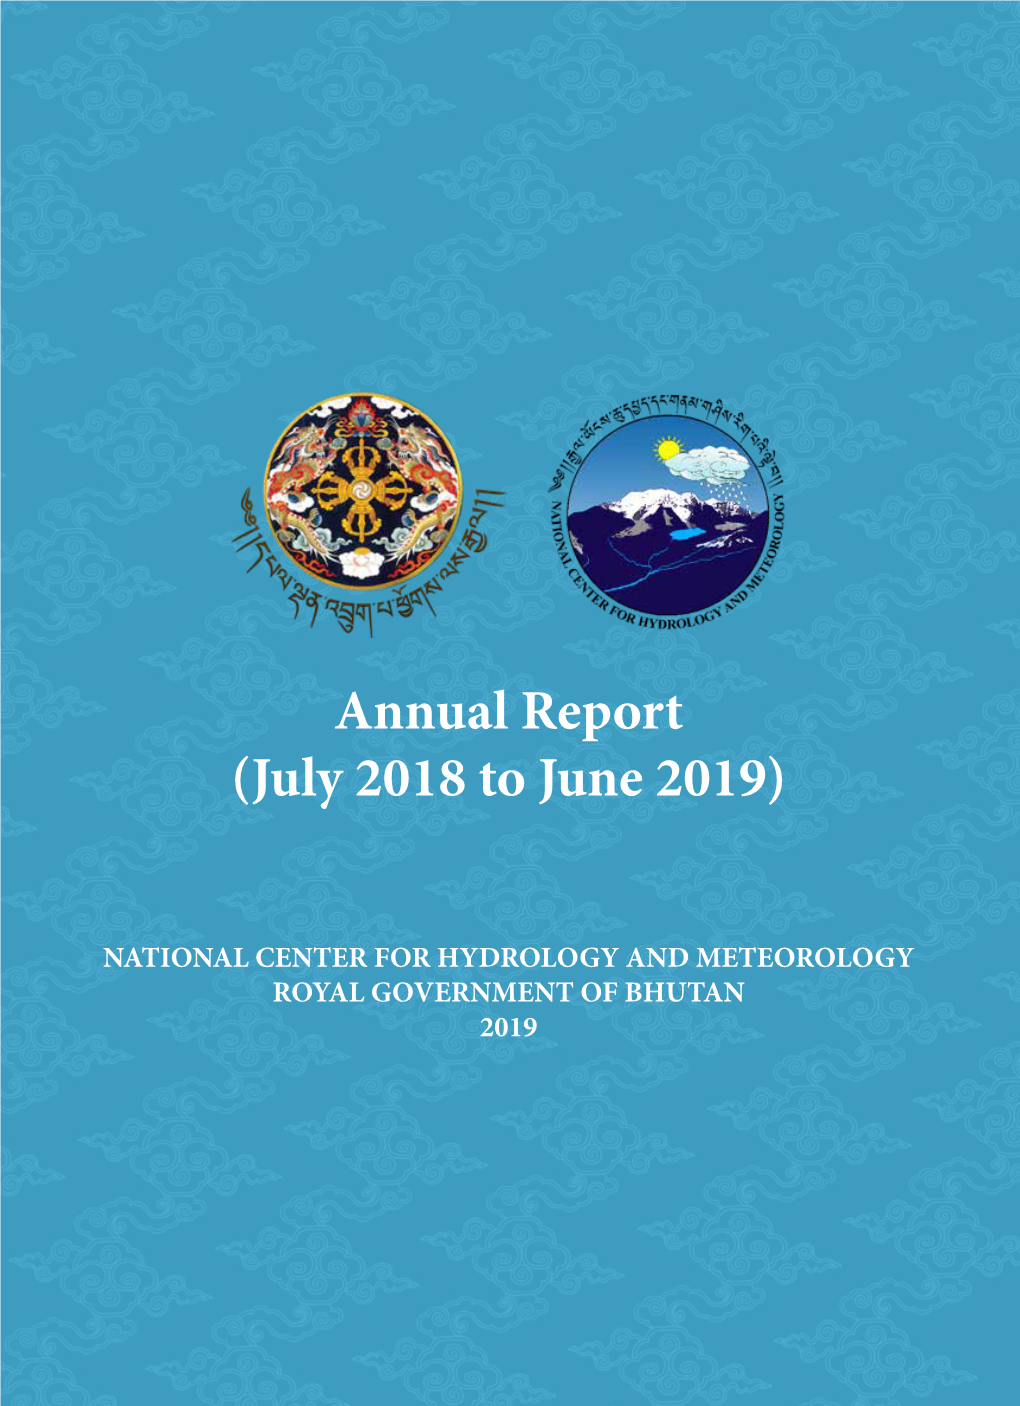 Annual Report (July 2018 to June 2019)